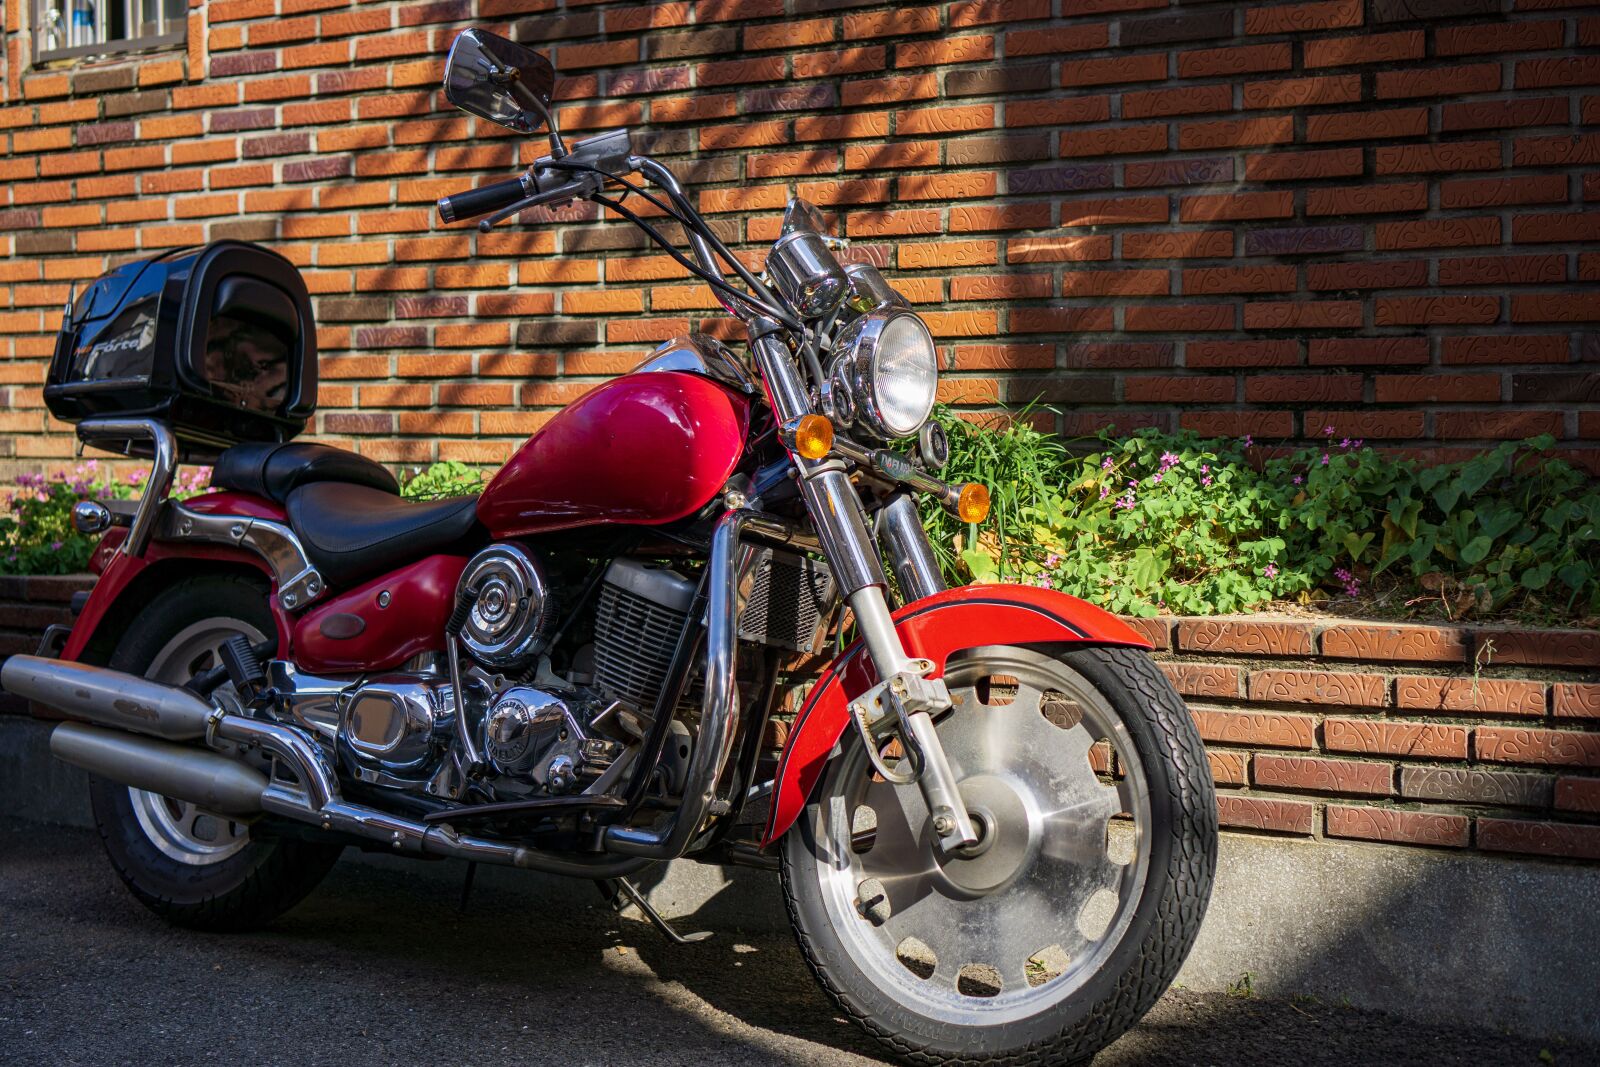 Sony a6000 + Sony E 35mm F1.8 OSS sample photo. Motorcycles, alleys, red photography